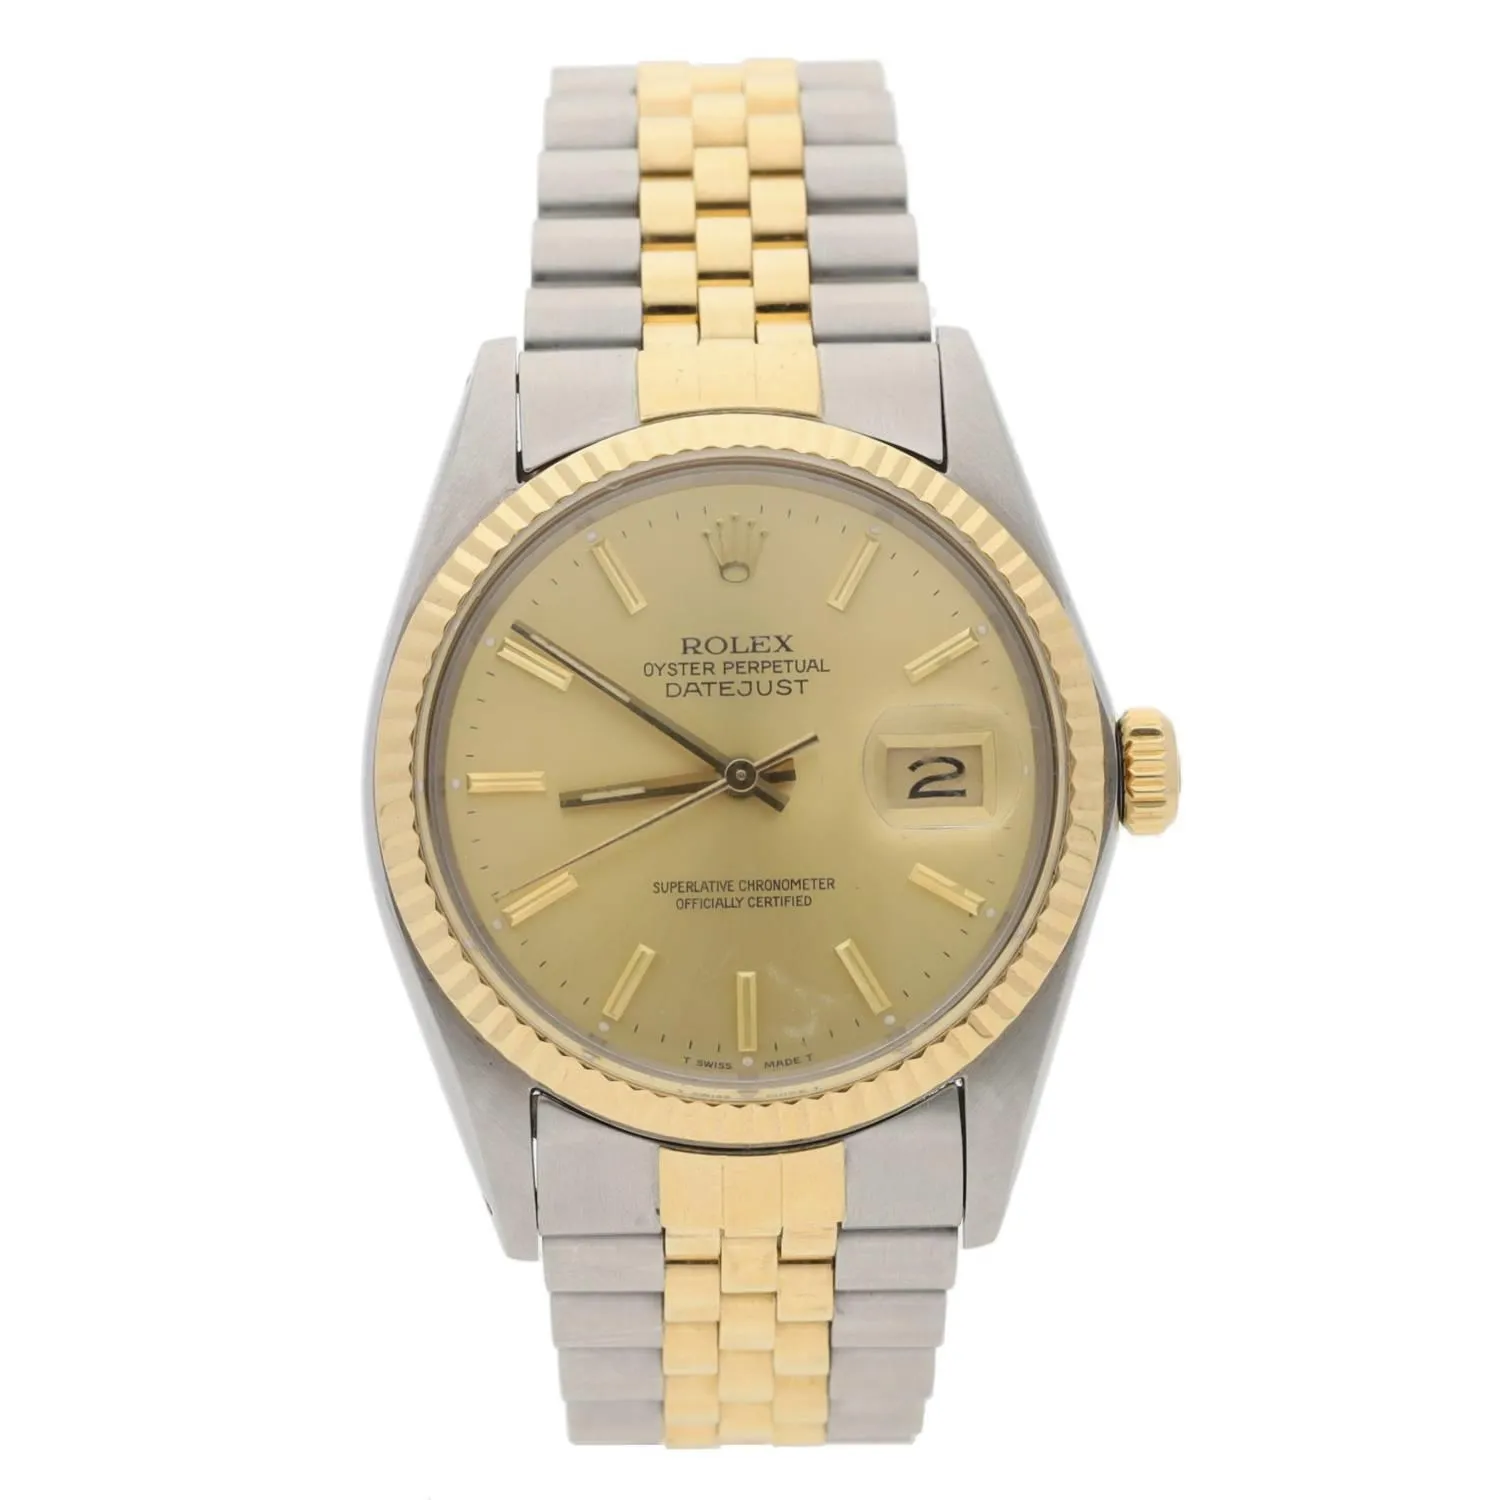 Rolex Datejust 36 16013 36mm Gold and stainless steel Champagne